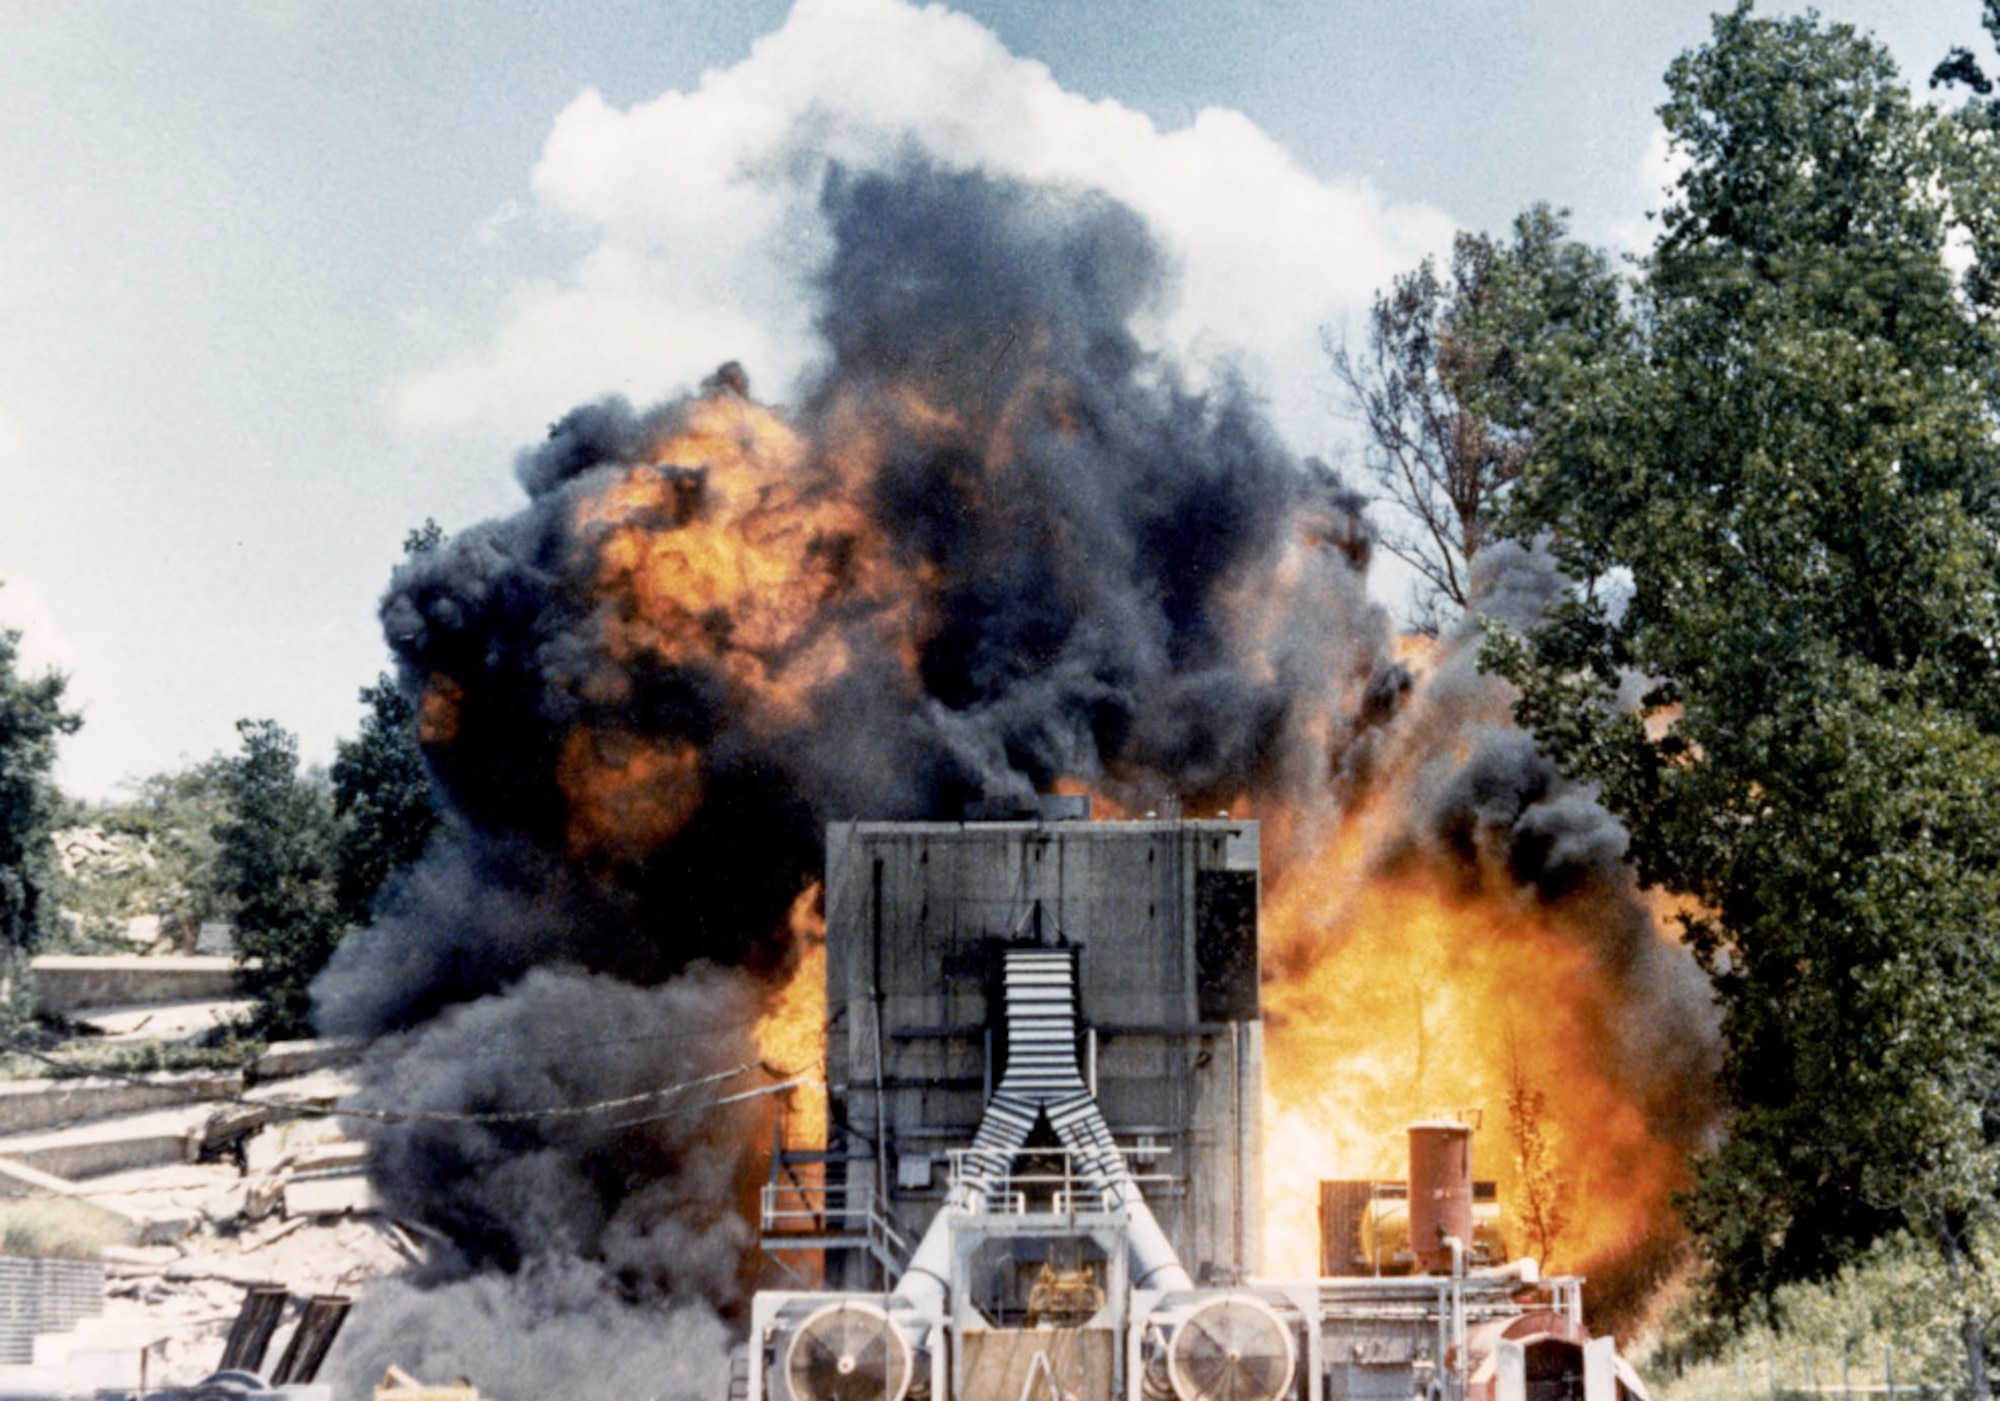 This historic photo shows the result of a ballistic impact on an aircraft fuel tank at the Aerospace Vehicle Survivability Facility (AVSF). The AVSF is responsible for developing and executing aircraft live fire test and evaluation programs as well as research, development, test and evaluation in addition to high-fidelity modeling and simulation of aerospace vehicle combat survivability to evaluate and enhance system performance to current and future weapon systems under operationally-realistic conditions. The AVSF is operated by the Aerospace Survivability and Safety Office at Wright-Patterson Air Force Base, Ohio. This office is part of the 704th Test Group at Holloman Air Force Base, New Mexico. The 704 TG is a unit of the Arnold Engineering Development Complex headquartered at Arnold Air Force Base, Tennessee. (Courtesy photo)